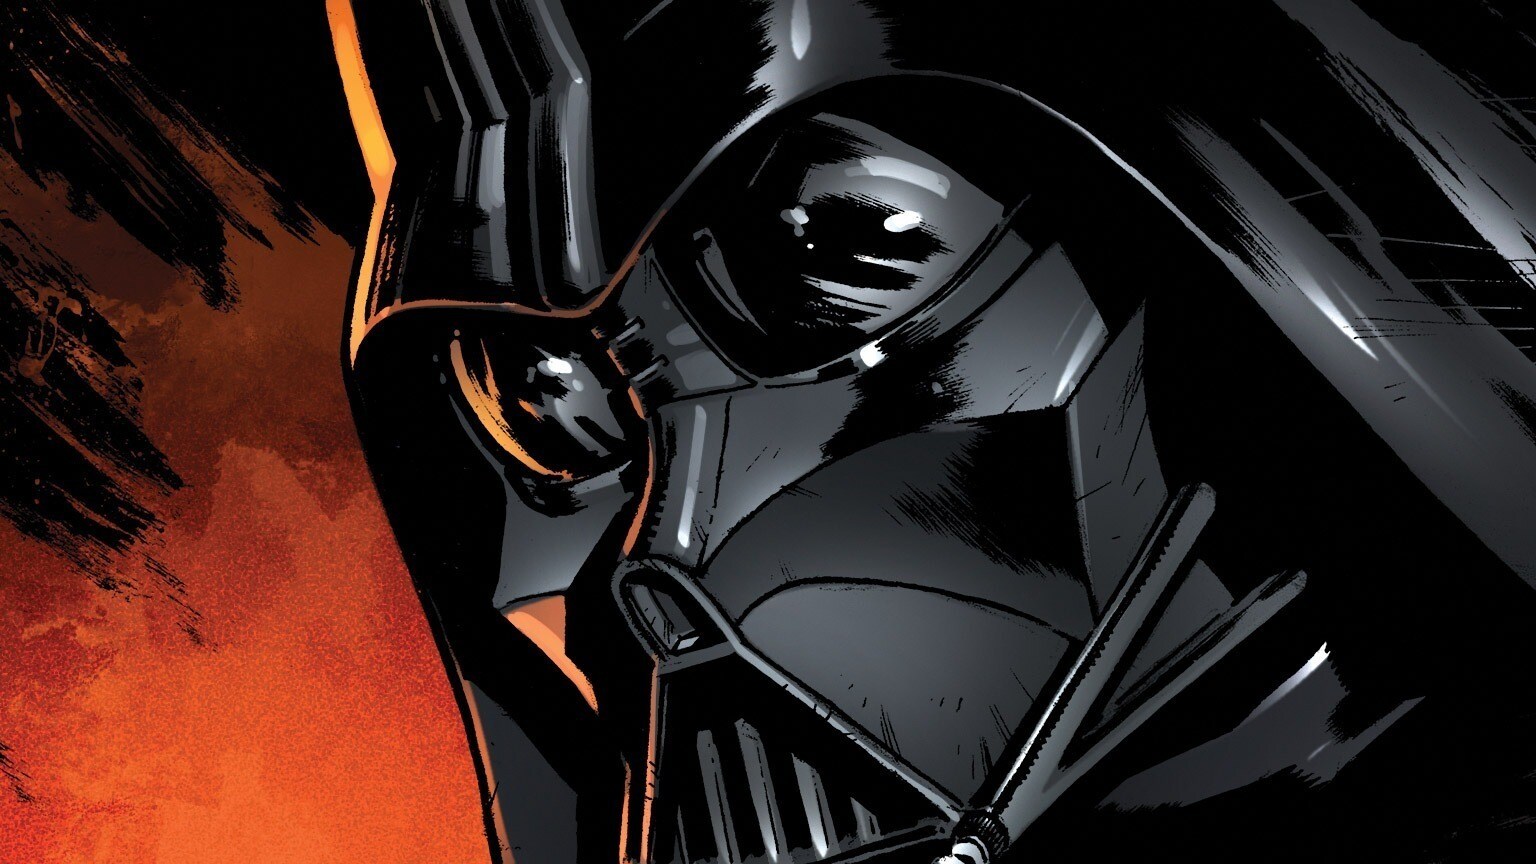 The Eye of the Webbish Bog Summons Vader Once More in Marvel’s Star Wars: Revelations #1 - Exclusive Preview